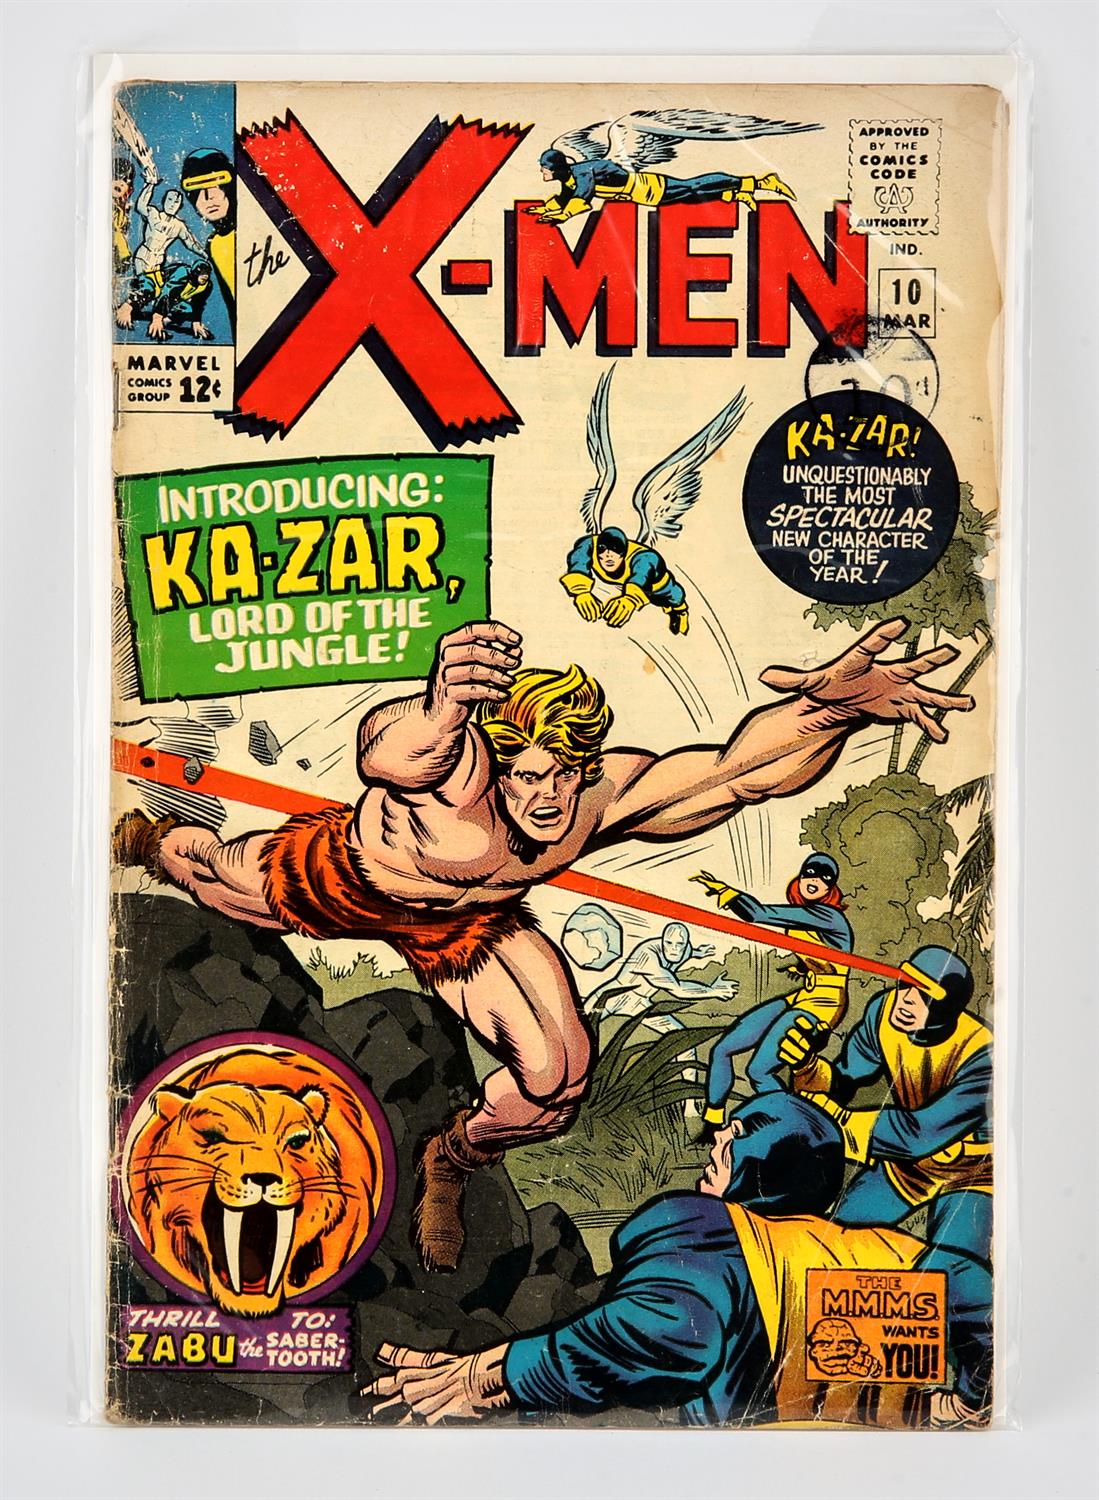 Marvel Comics: Uncanny X-Men No. 10 featuring the 1st appearance of Ka-Zar and others (1965).